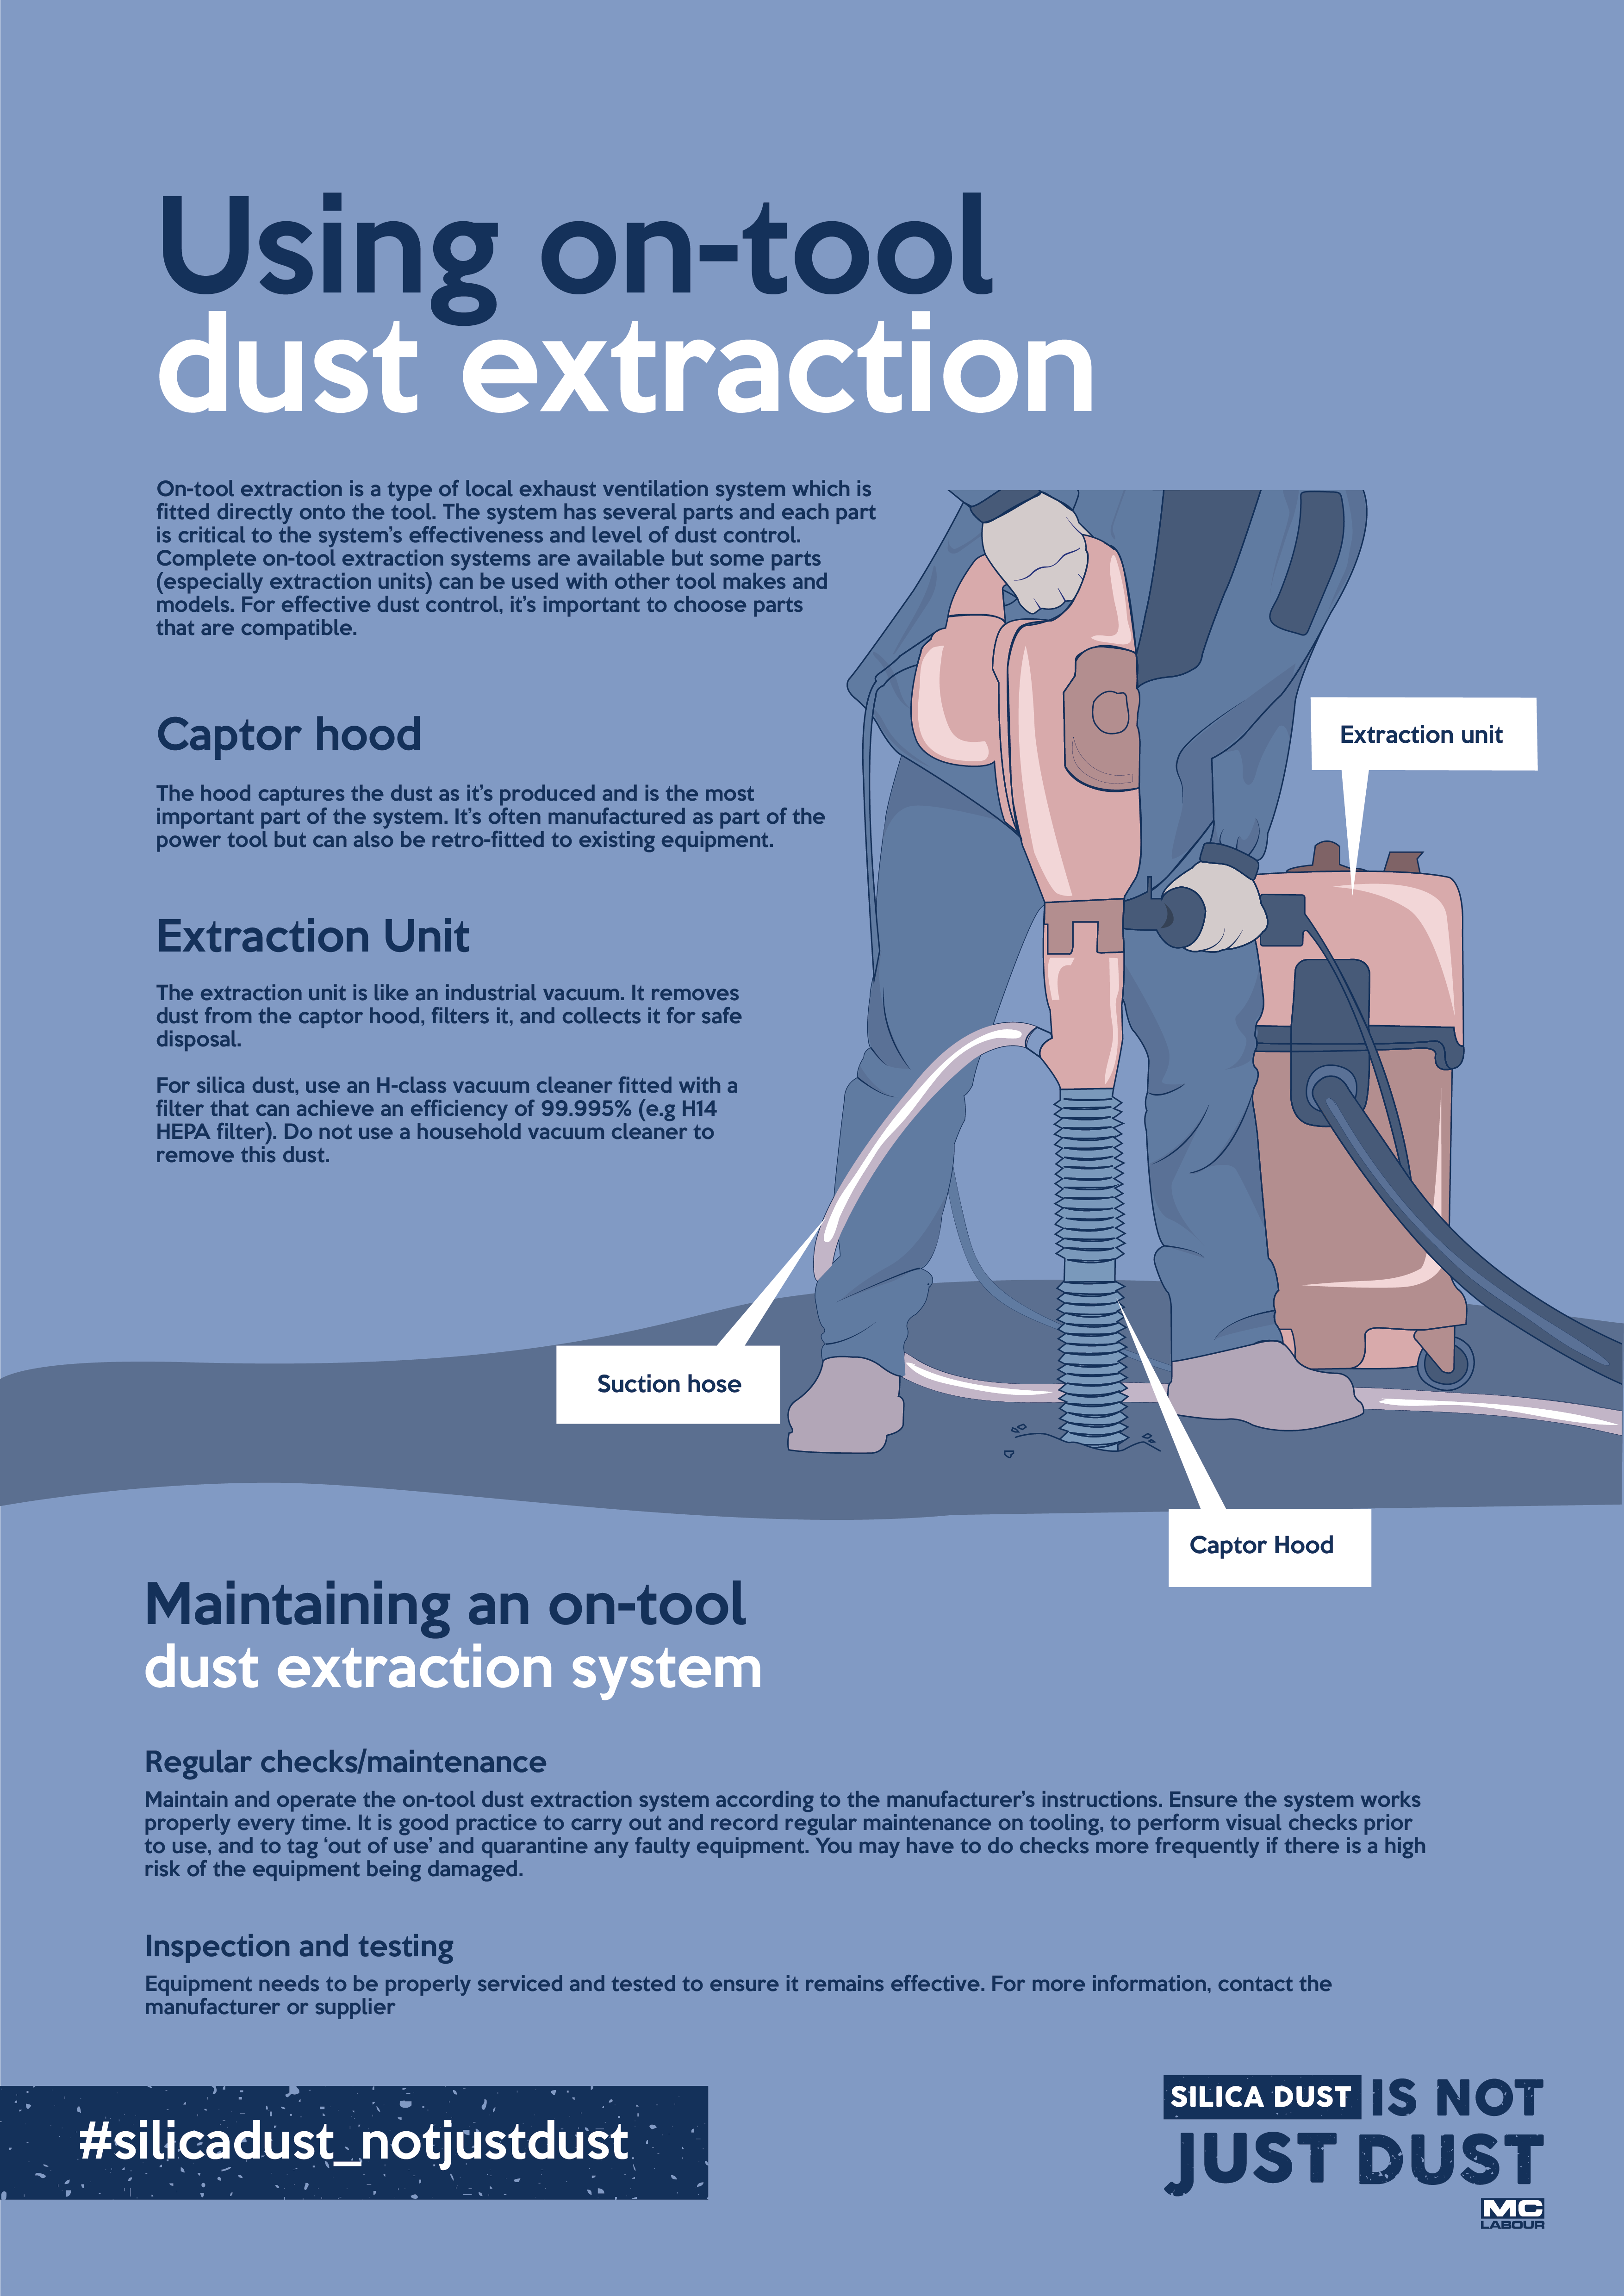 Using on-tool dust extraction to minimise silica dust exposure